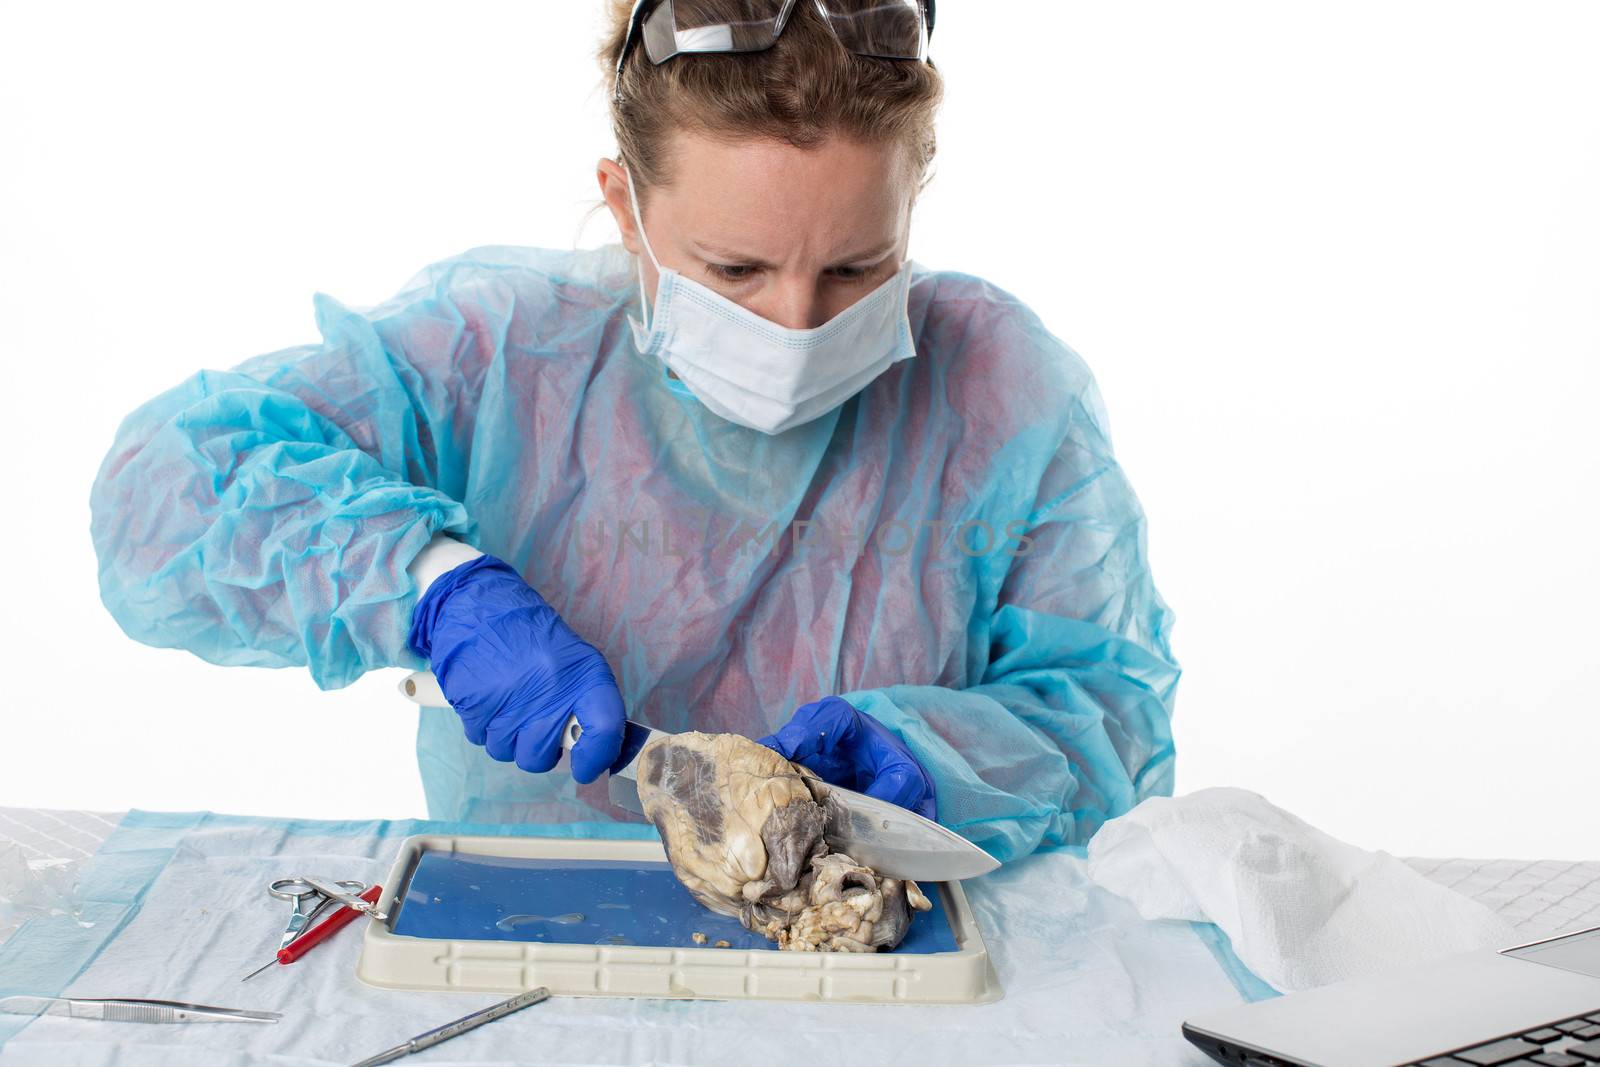 Young female medical student doing anatomy classes sitting at a bench in the laboratory dissecting and analysing the heart of a sheep